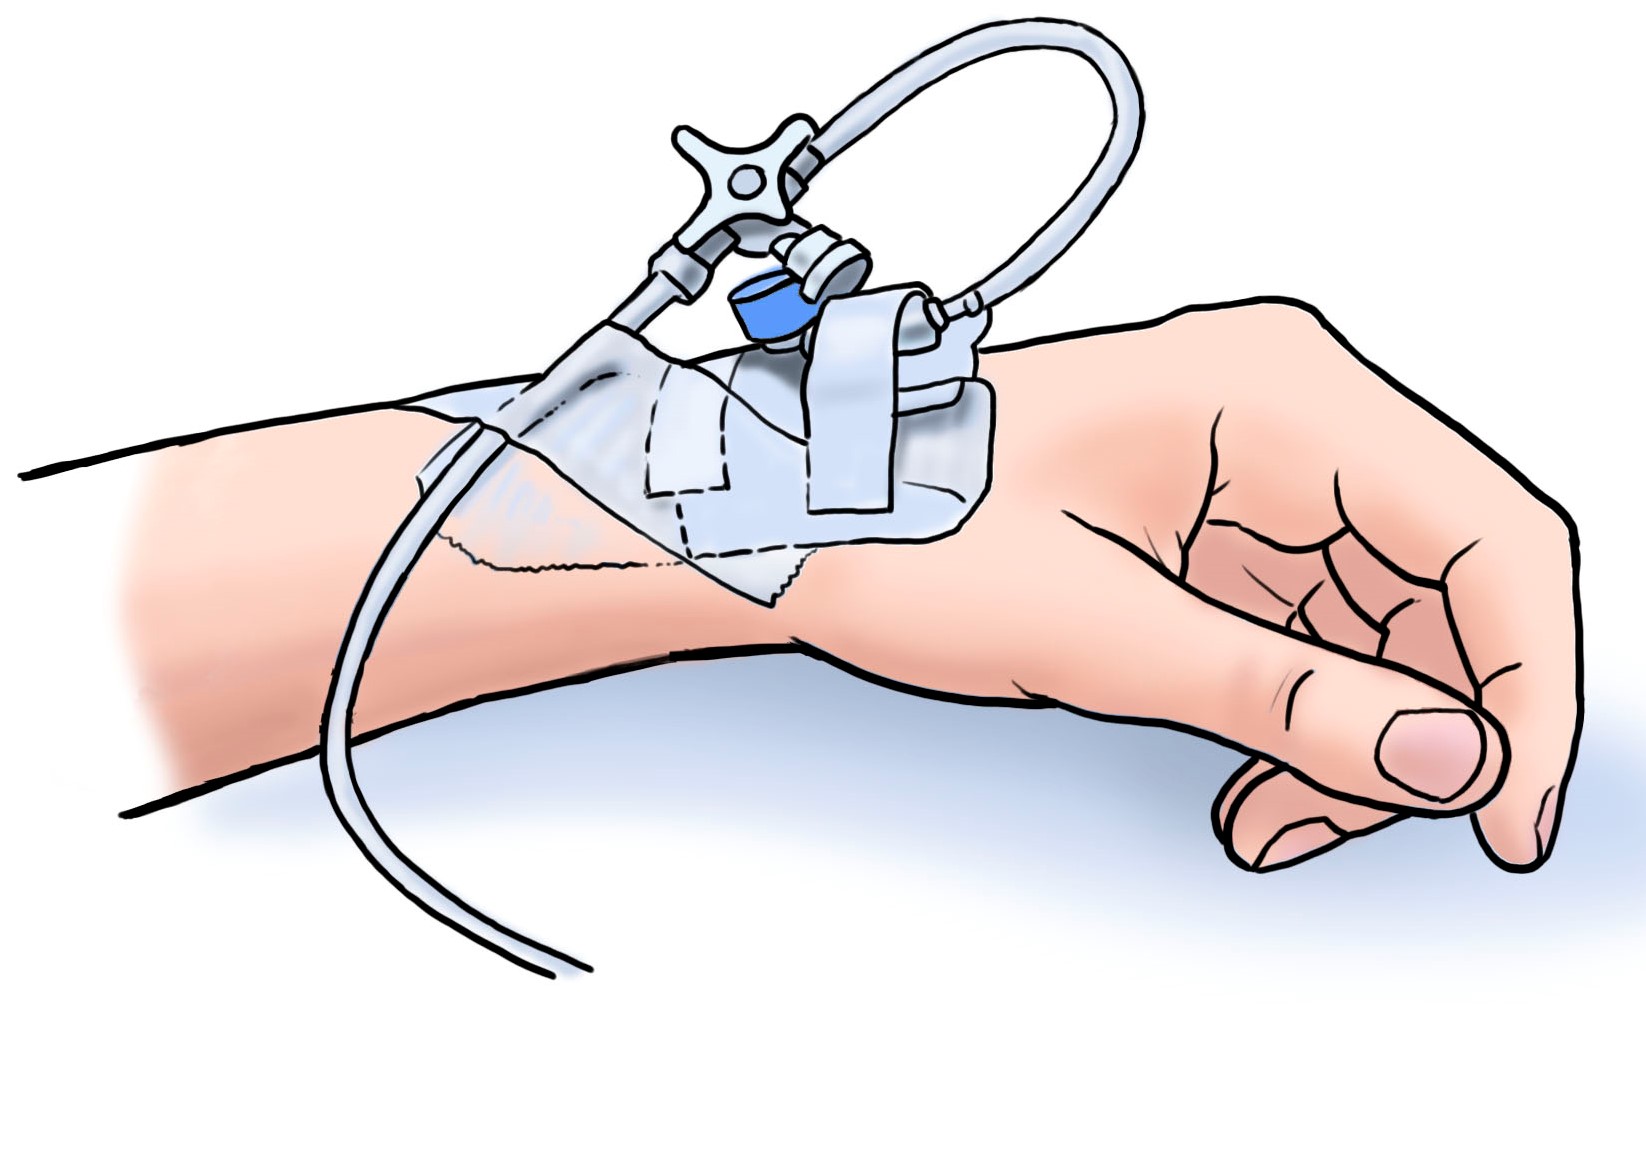 IV Therapy Care & Cannulation Course Theory Part